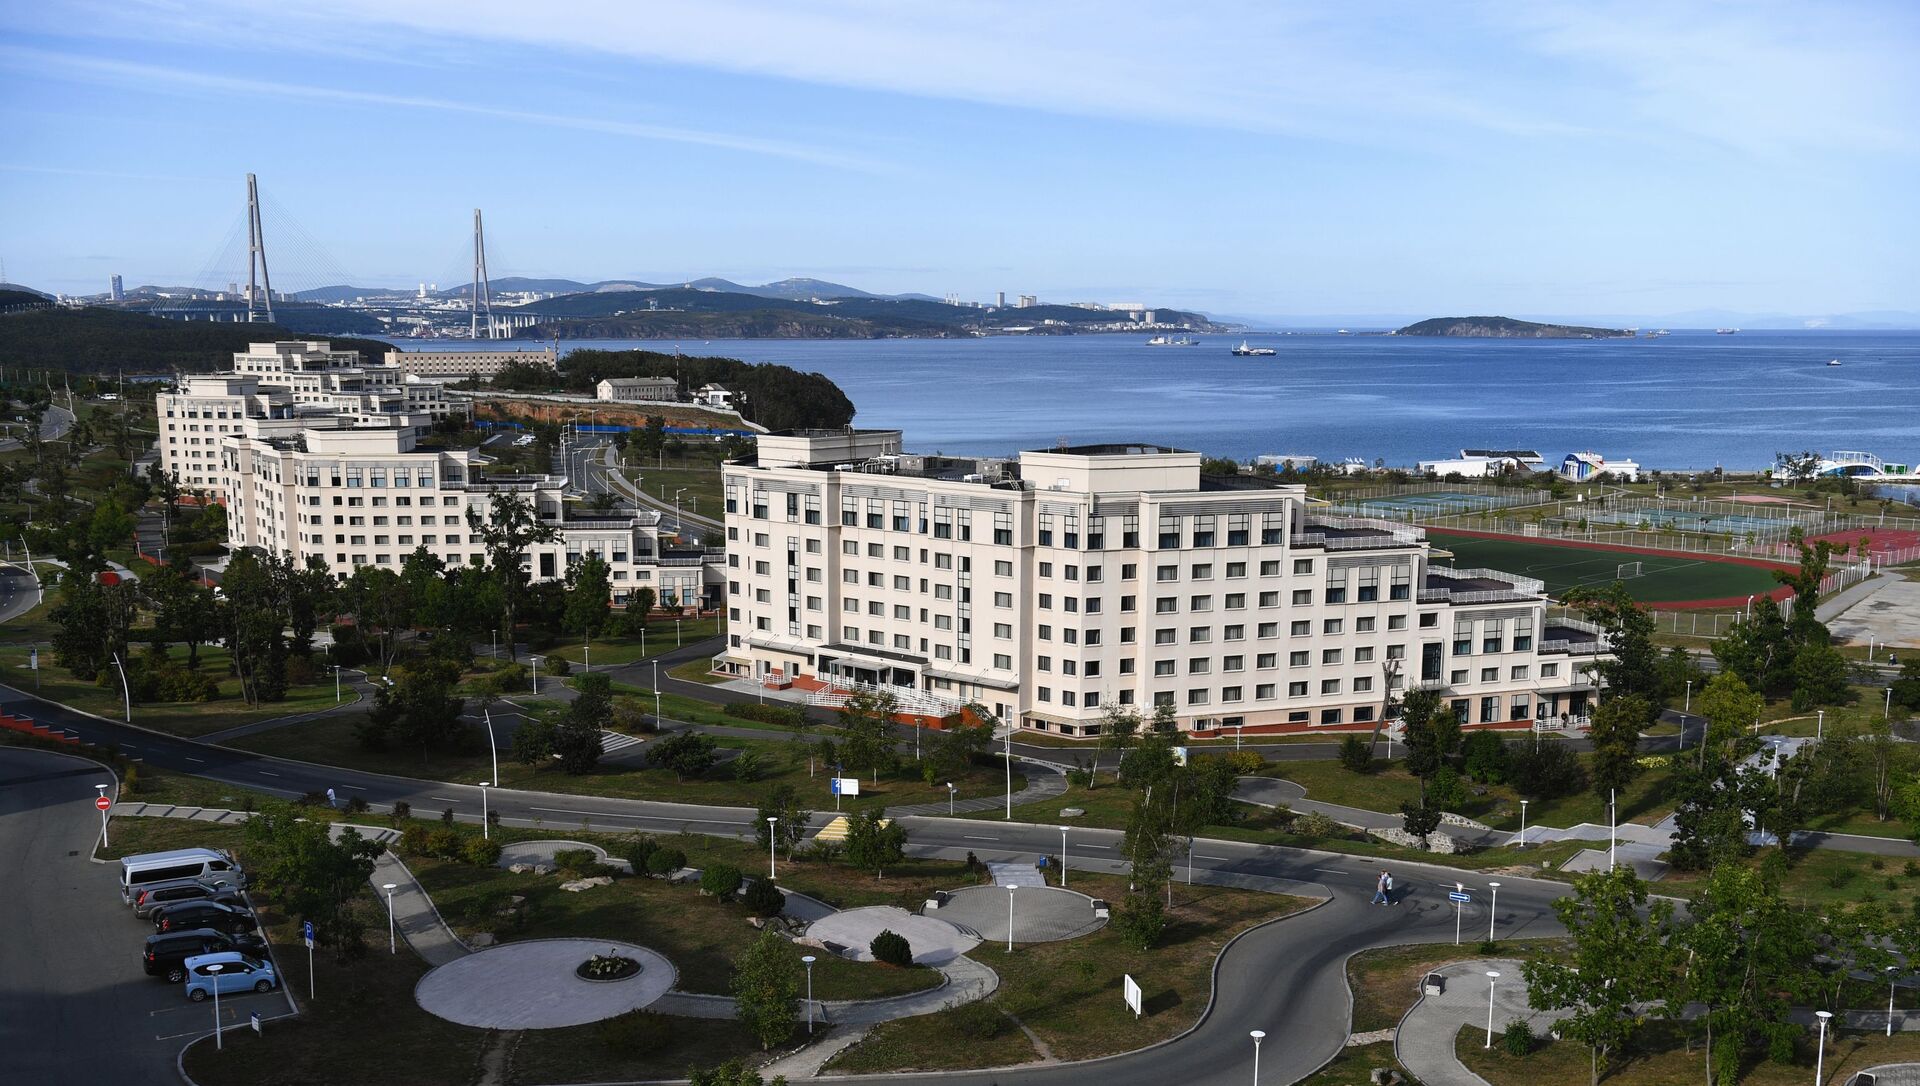 View of the campus of the Far Eastern Federal University (FEFU) on the shores of the Ajax Bay in Vladivostok, Russia where the Eastern Economic Forum (EEF) will be held between 2 and 4 September 2021. - Sputnik International, 1920, 02.09.2021